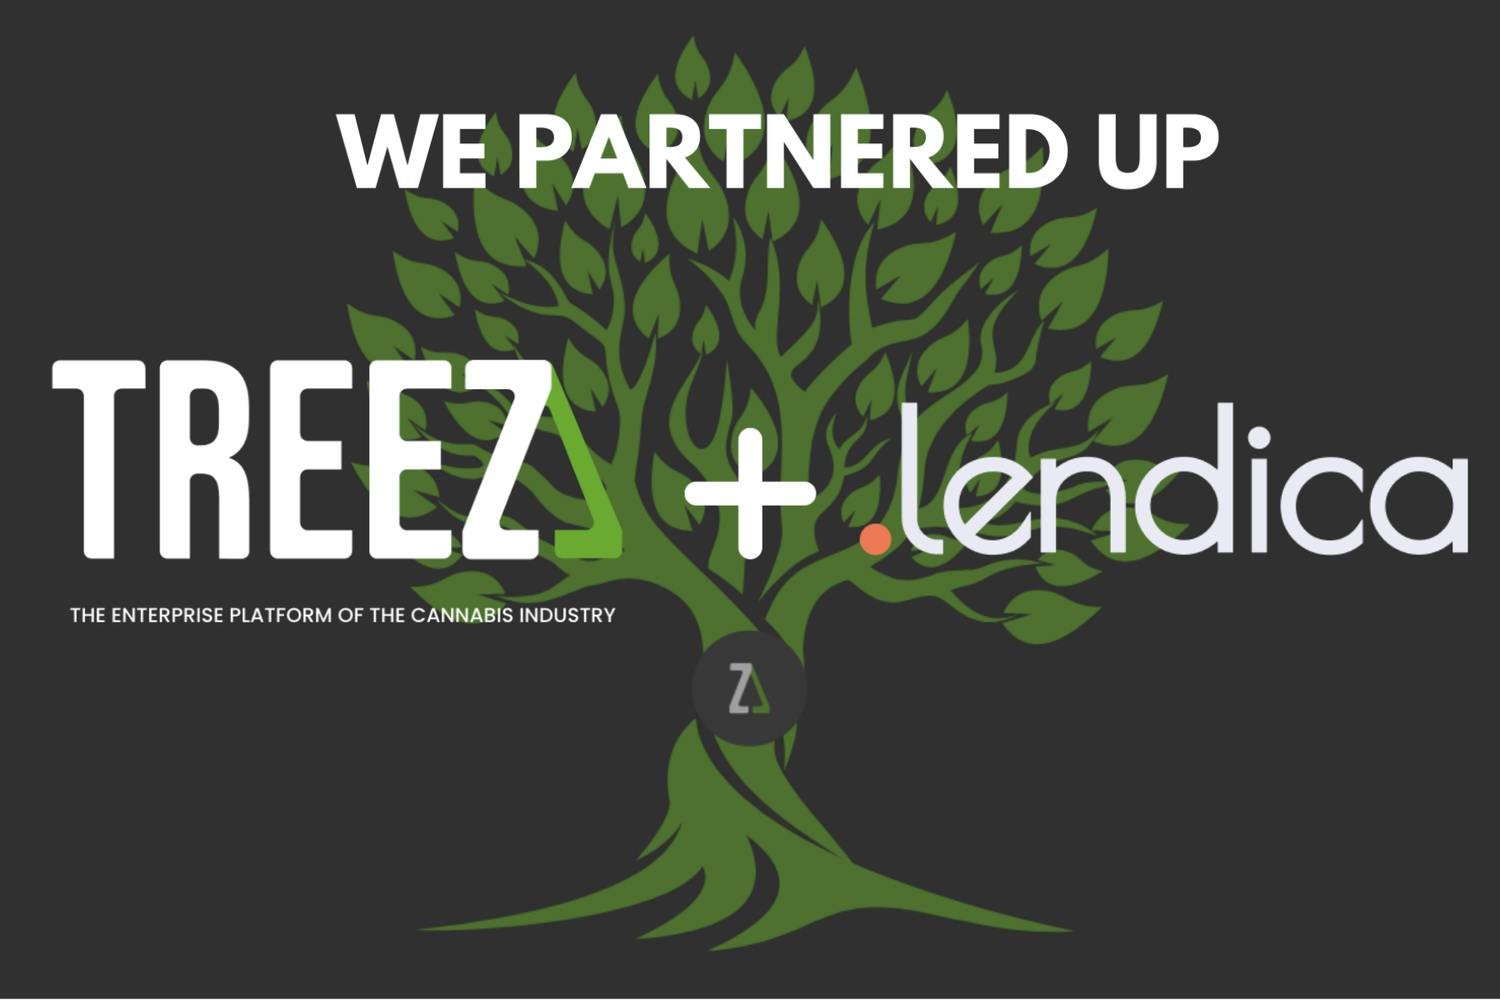 A swirling tree is behind two logos - one is the Treez, white and green with the enterprise platform of the cannabis industry and the next is lendica, a white lettermark with a orange dot. The image reads "We partnered up"